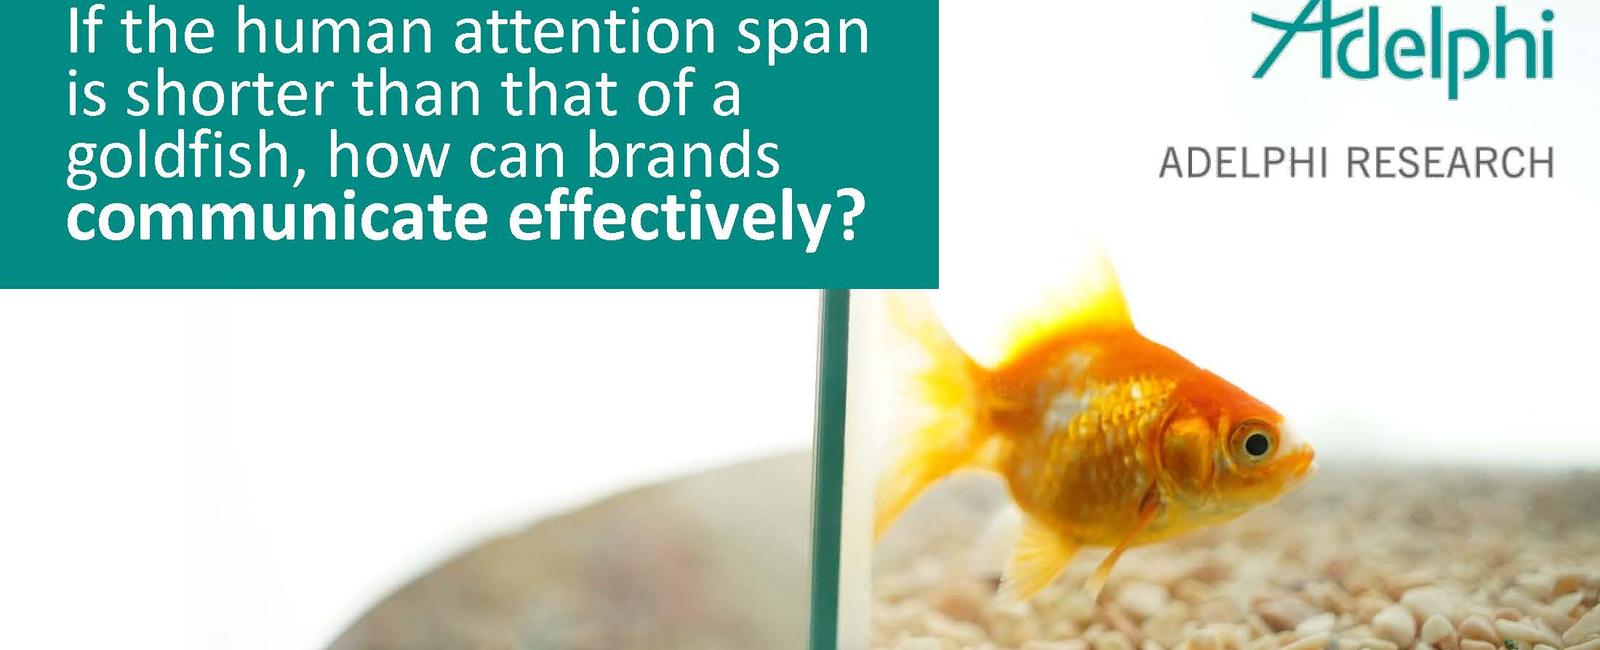 Humans now have a shorter attention span than a goldfish studies have found that the average person s attention span lapses at 8 seconds while a goldfish lasts 9